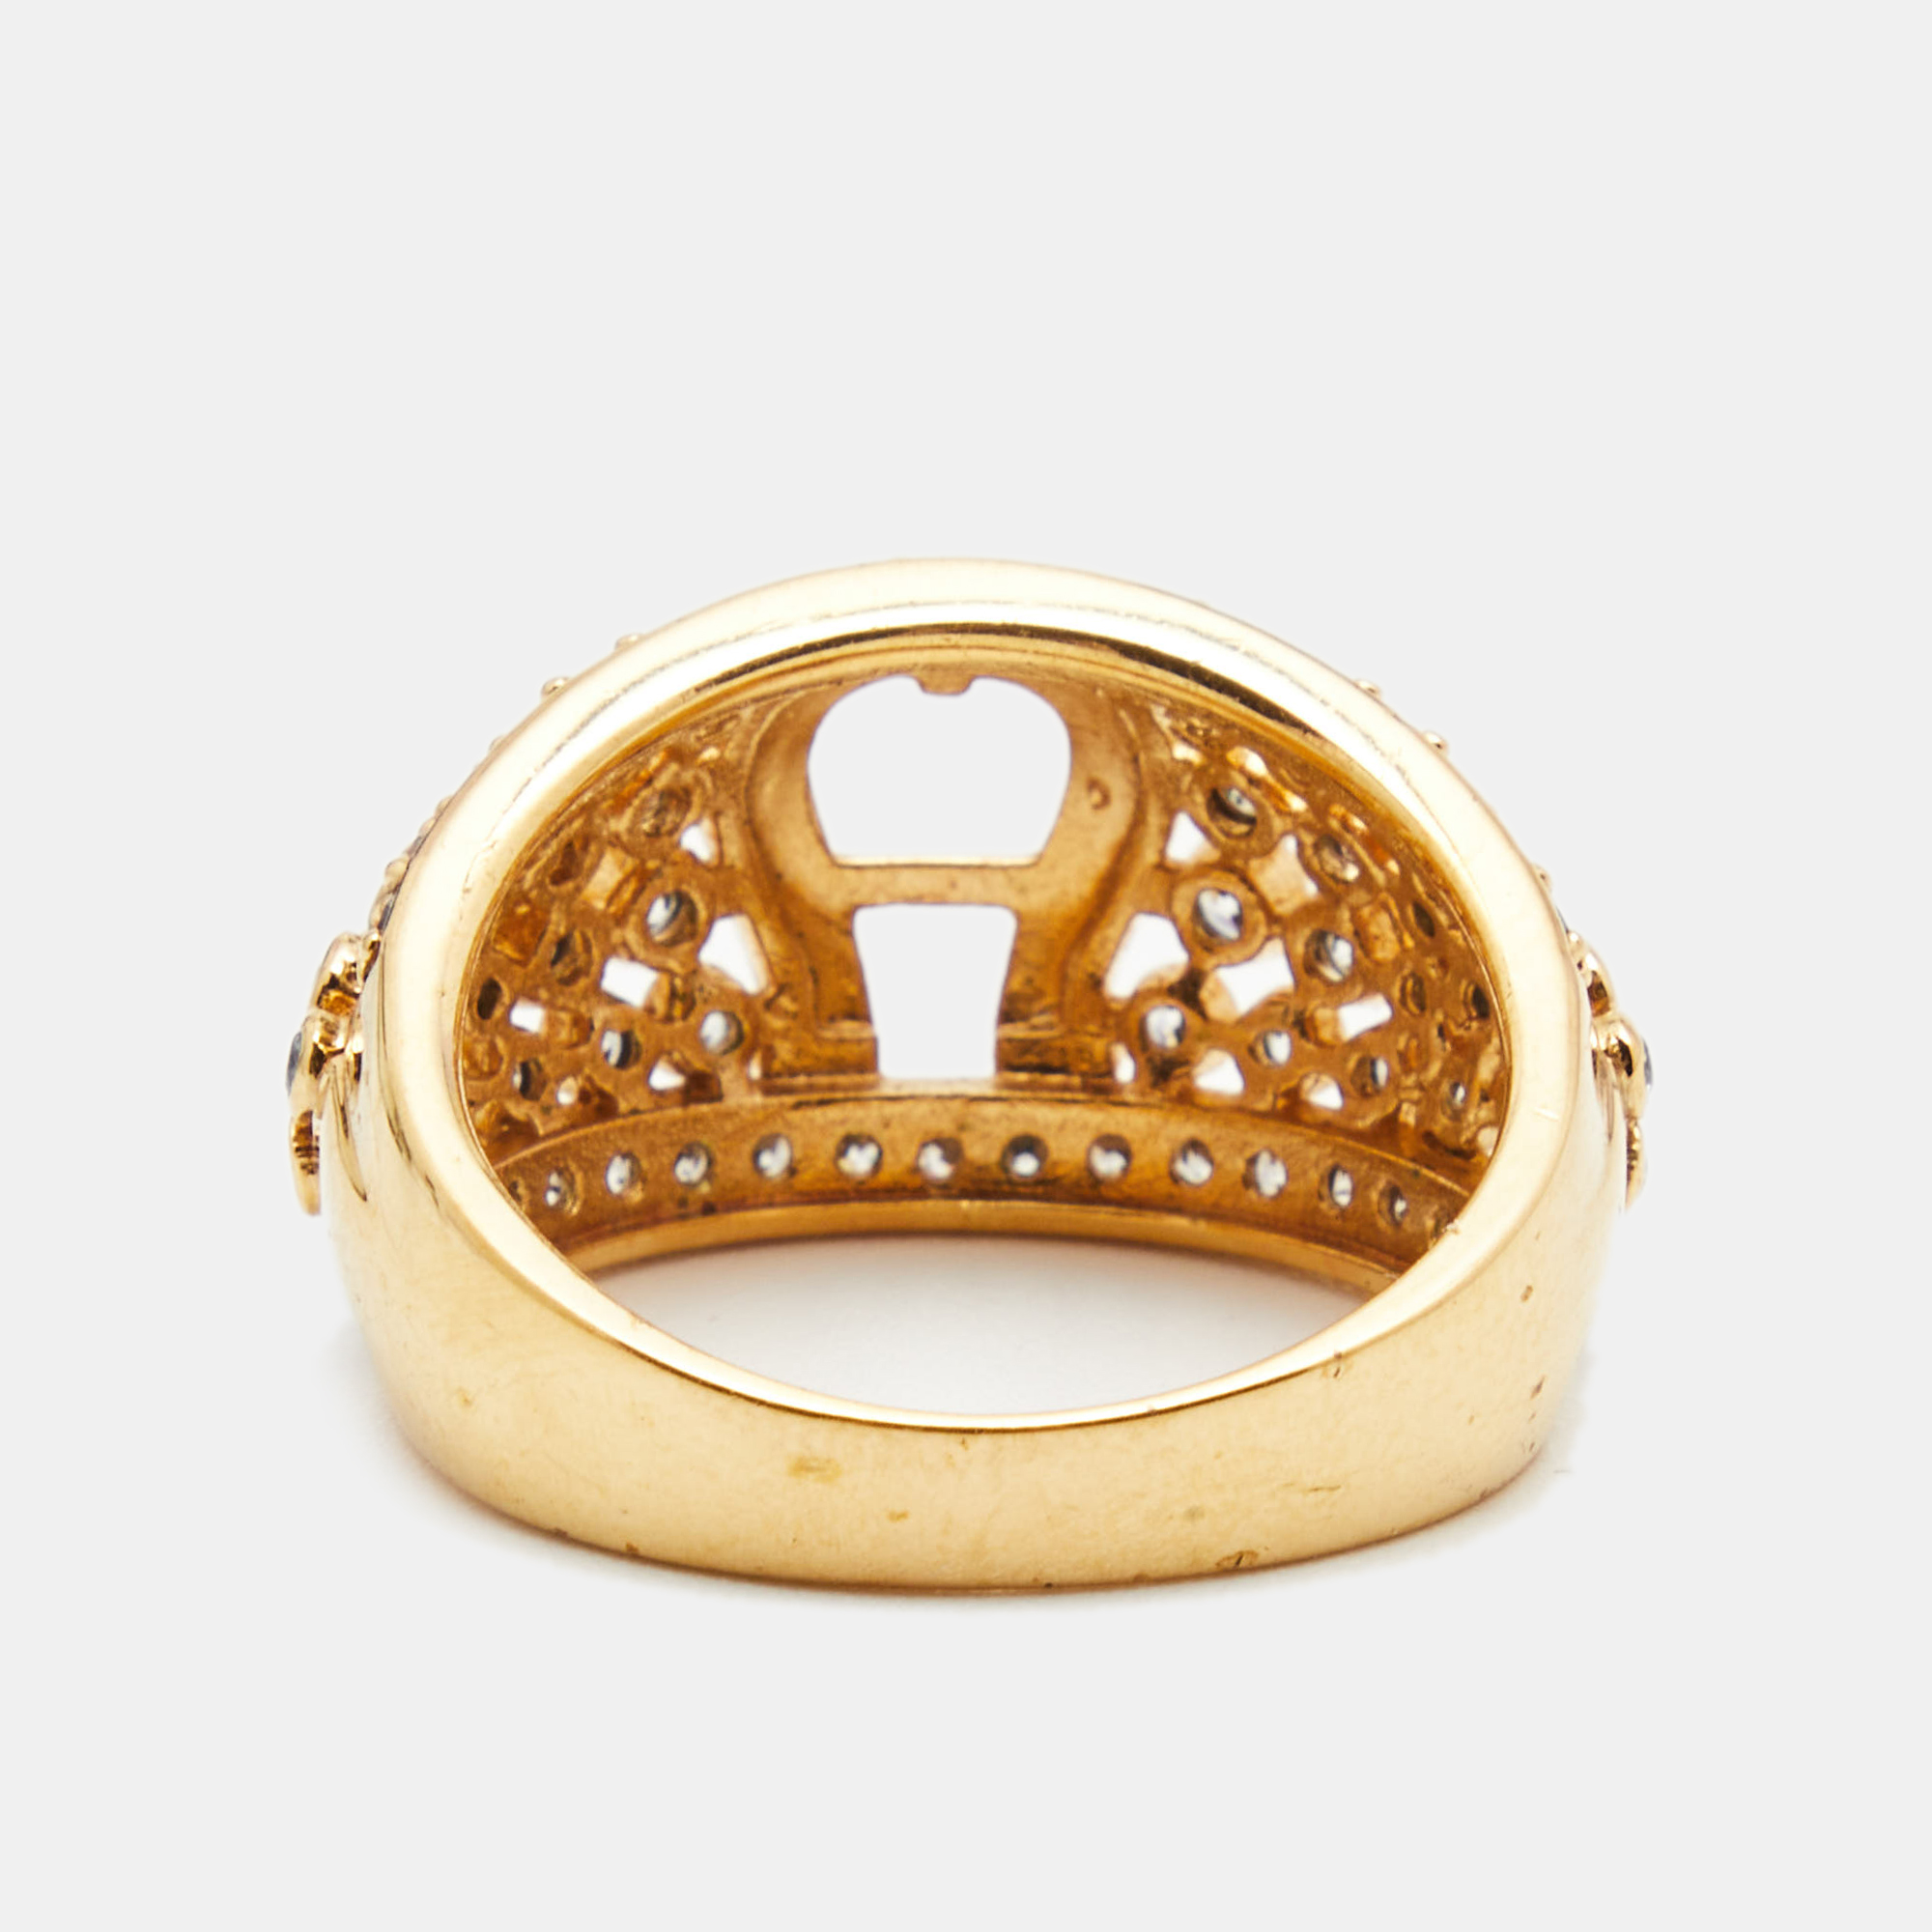 Aigner Crystals Gold Tone Ring Size 56